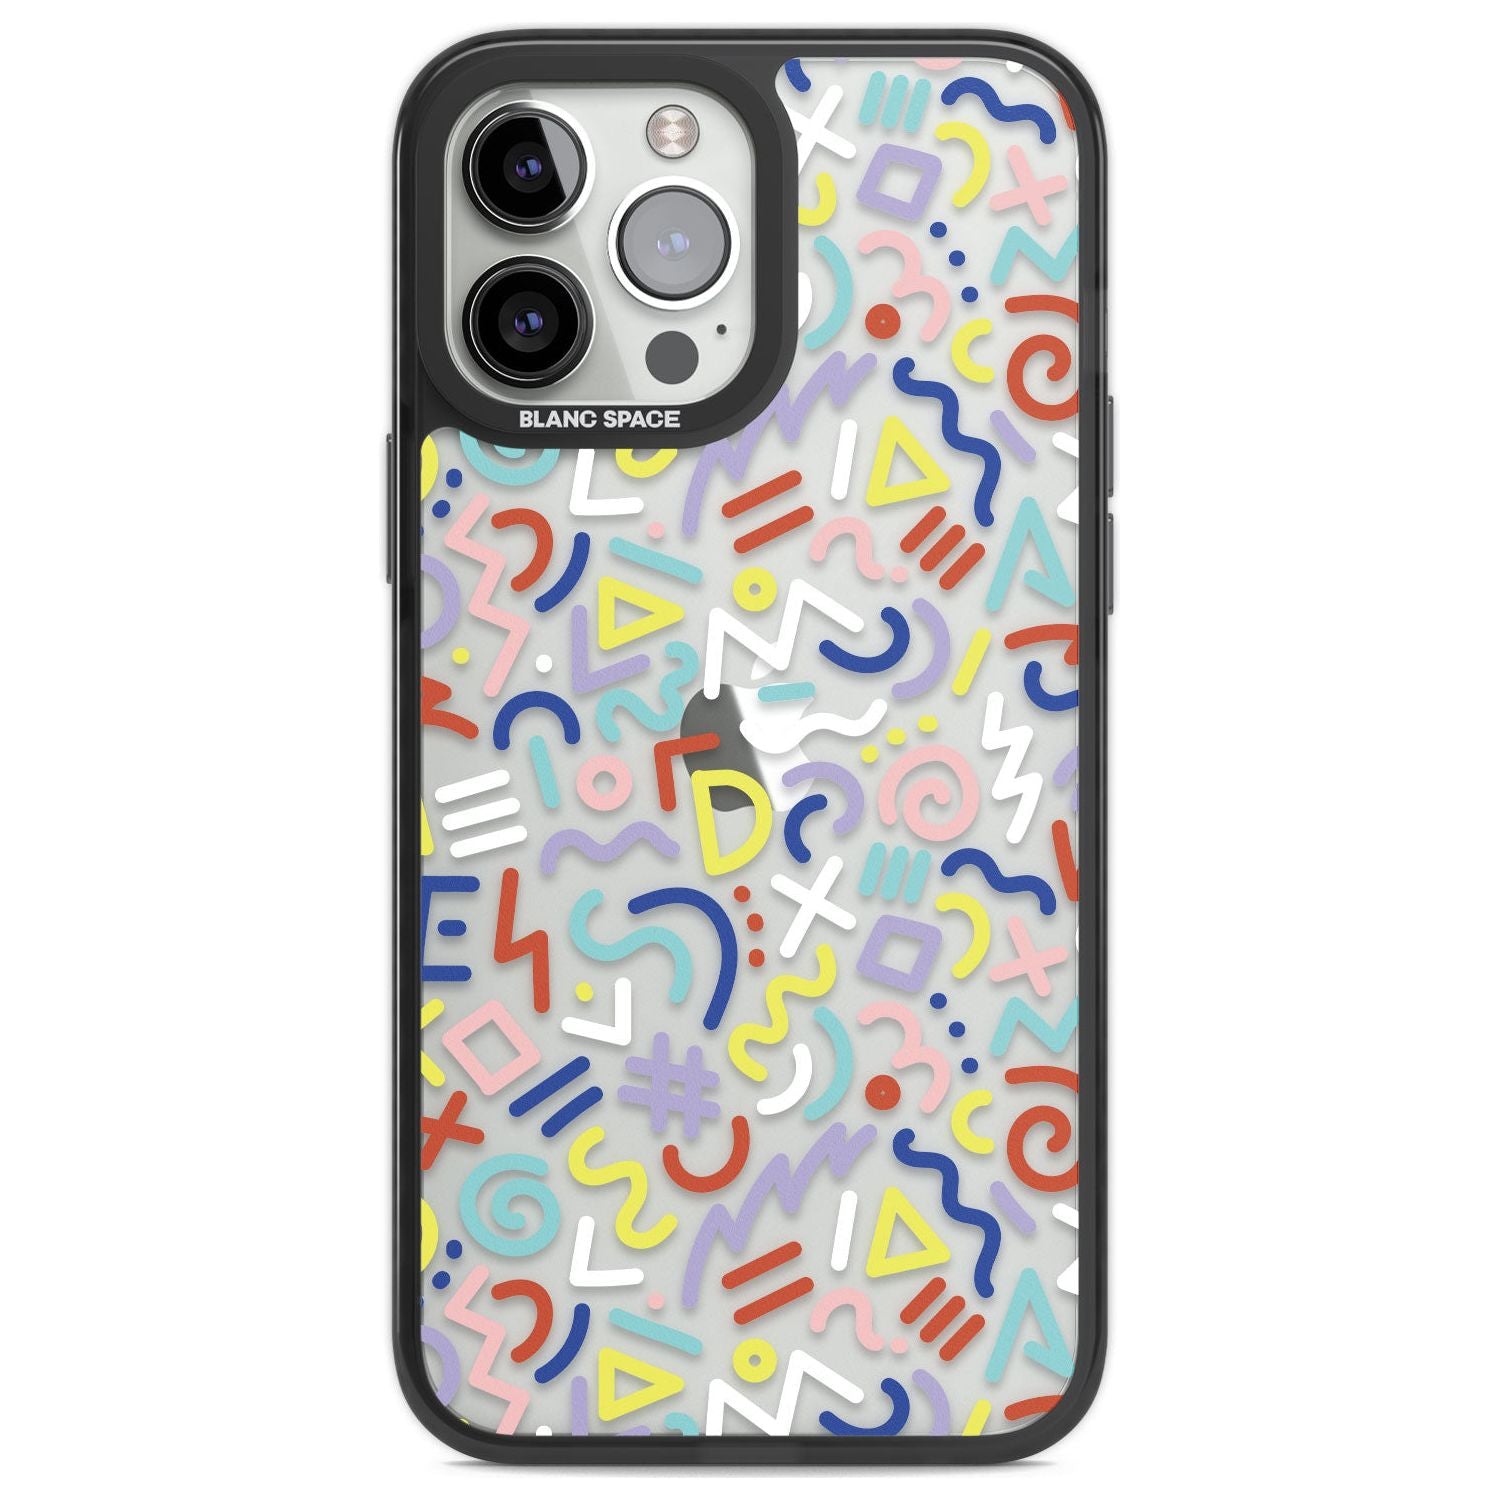 Colourful Mixed Shapes Retro Pattern Design Phone Case iPhone 13 Pro Max / Black Impact Case,iPhone 14 Pro Max / Black Impact Case Blanc Space